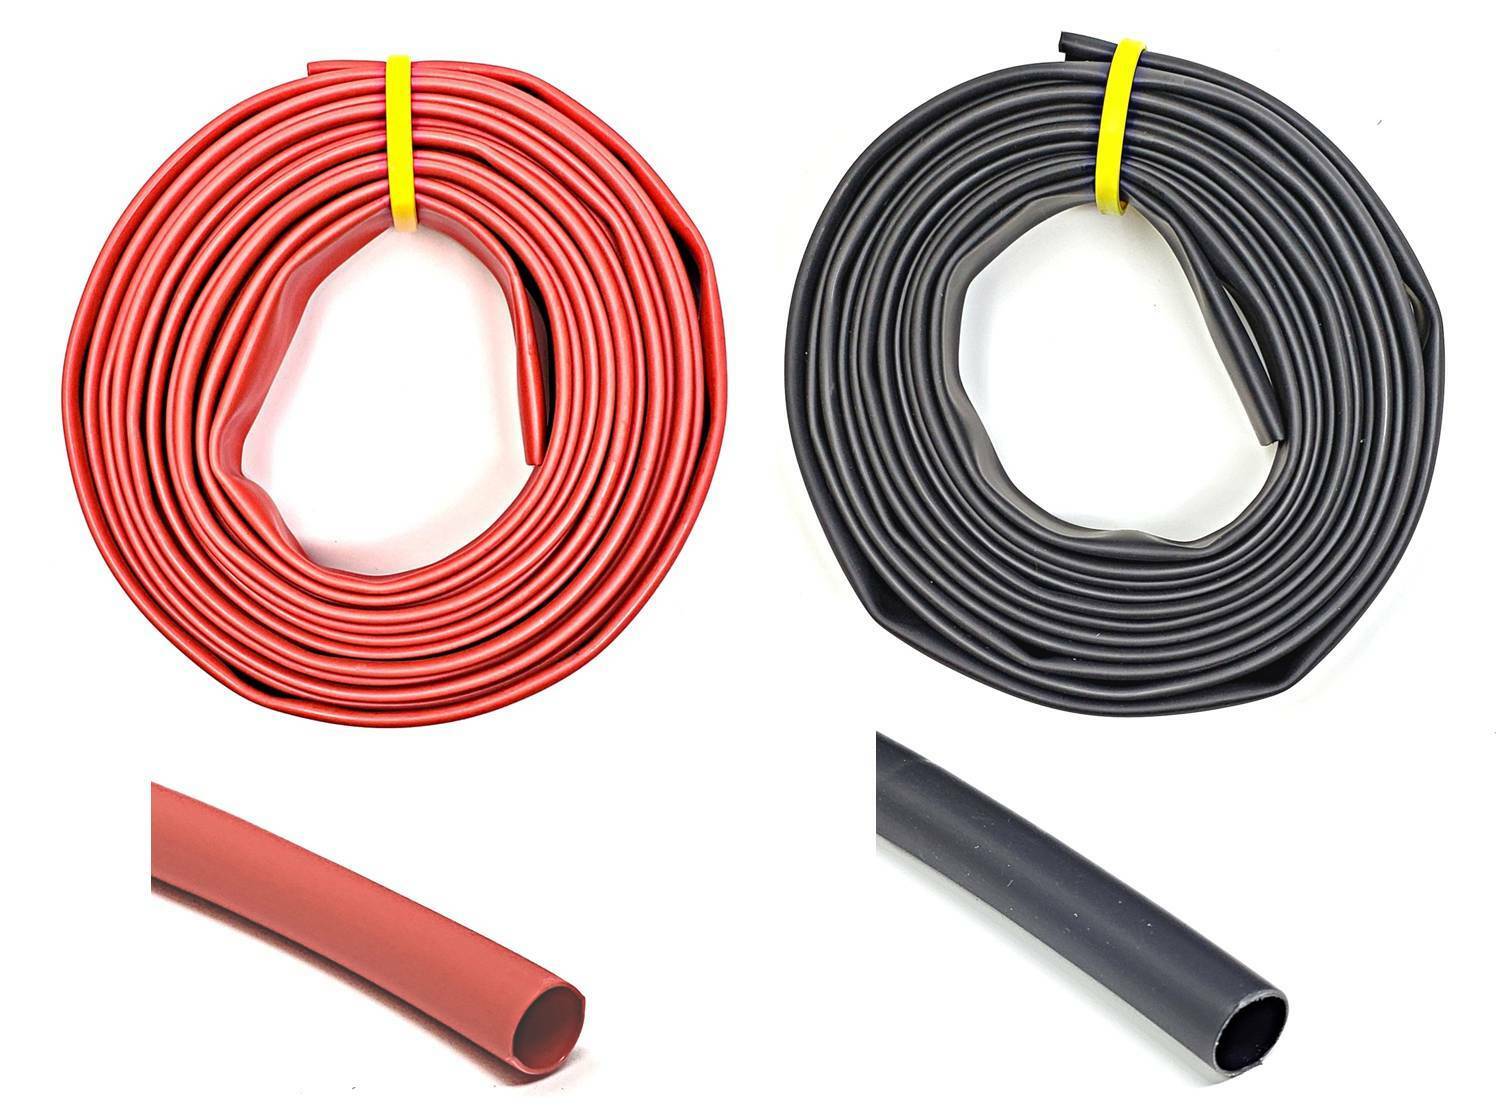 WindyNation Black and Red 2:1 Polyolefin Heat Shrink Tube Tubing UL Listed